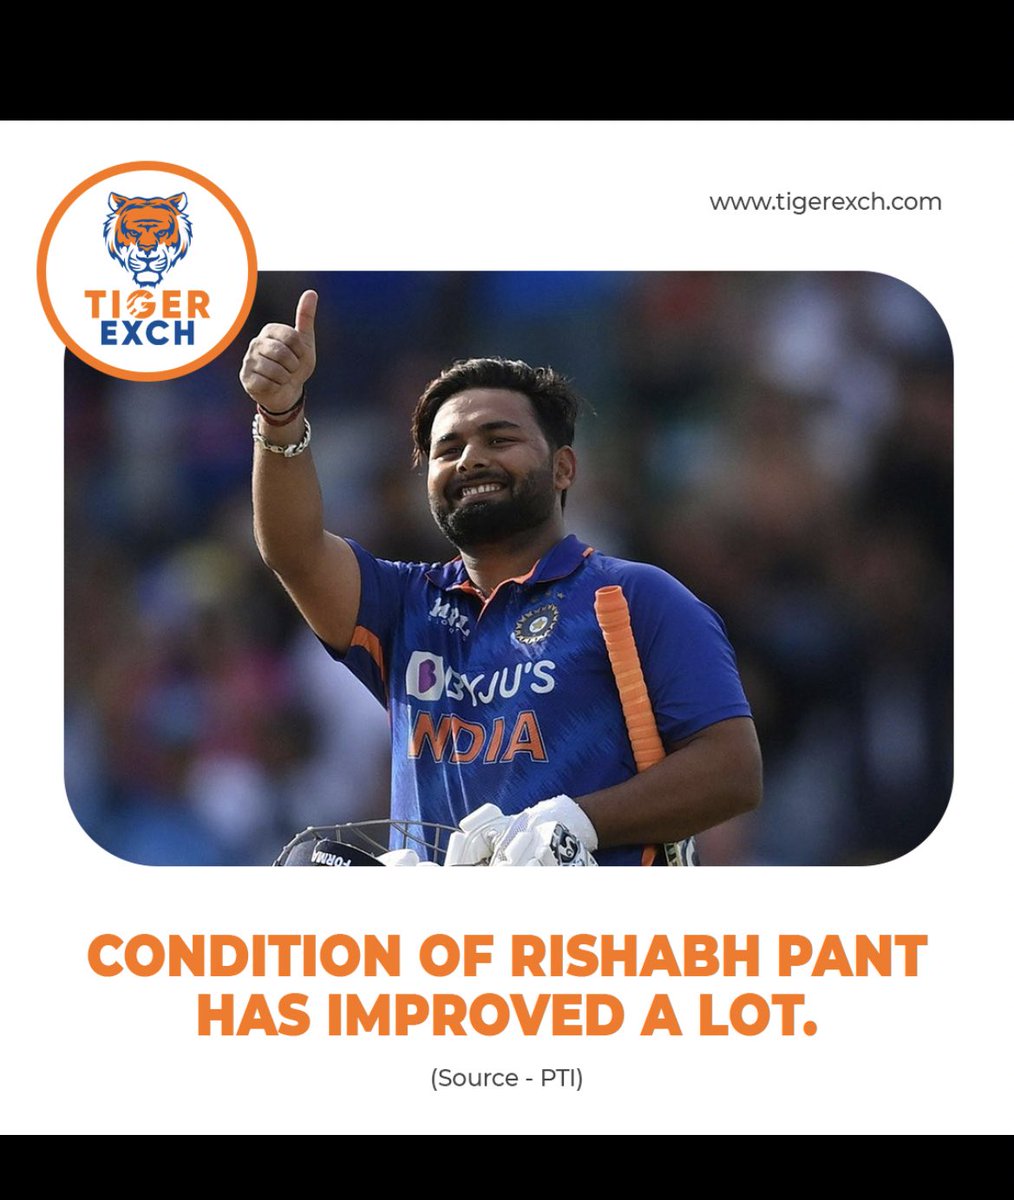 A very good news for the fans!!!

#tigerexch #pant #indiacricketteam